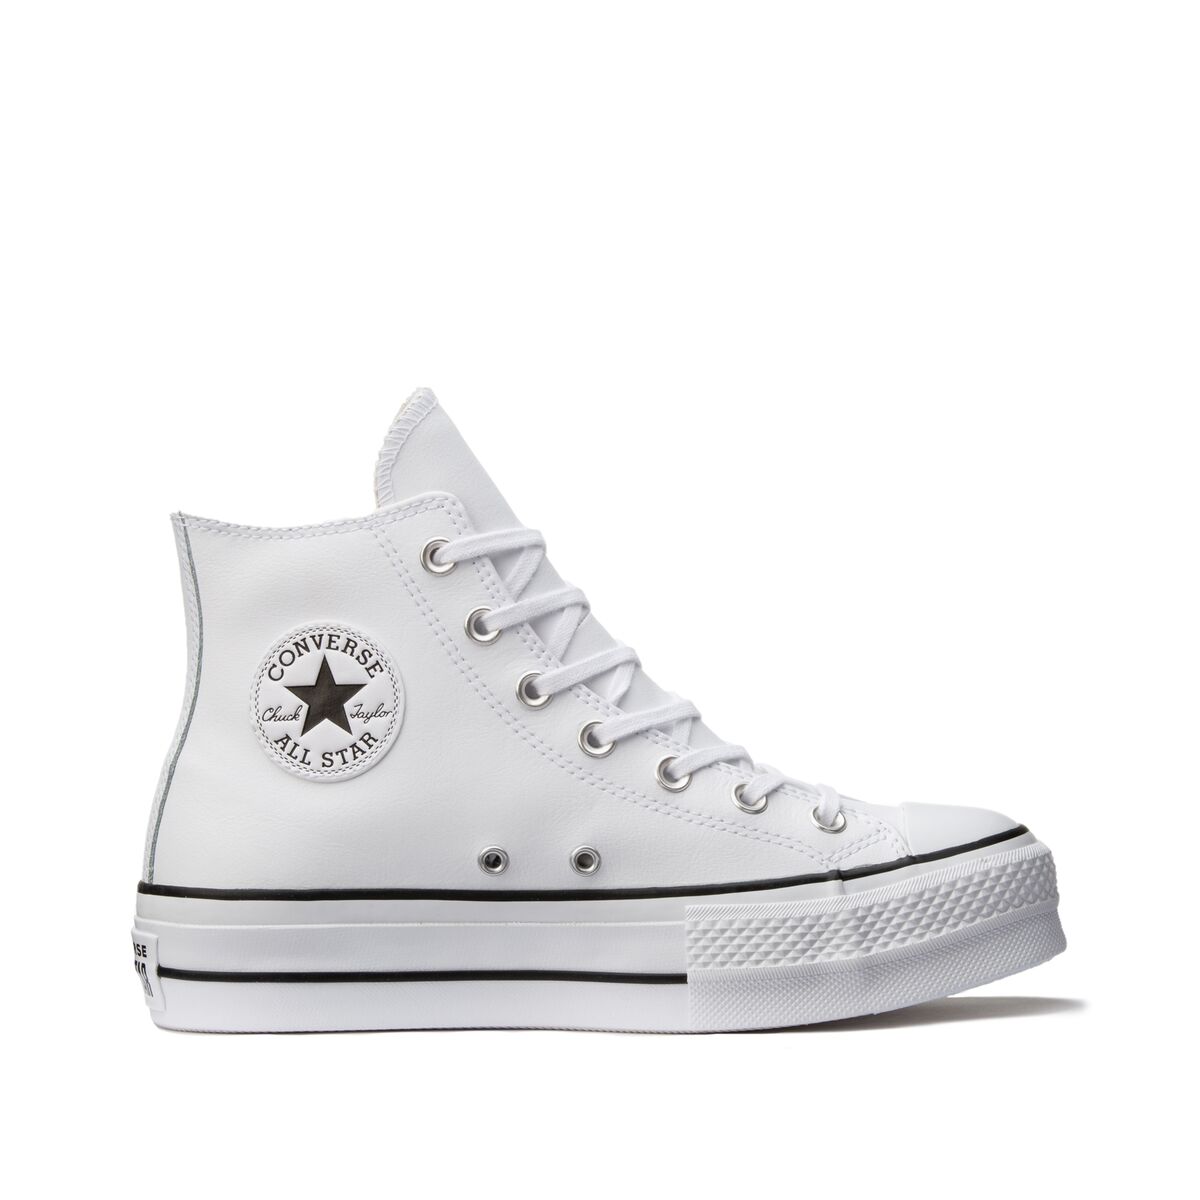 CONVERSE Hohe Sneakers Chuck Taylor All Star Lift, Leder WEISS